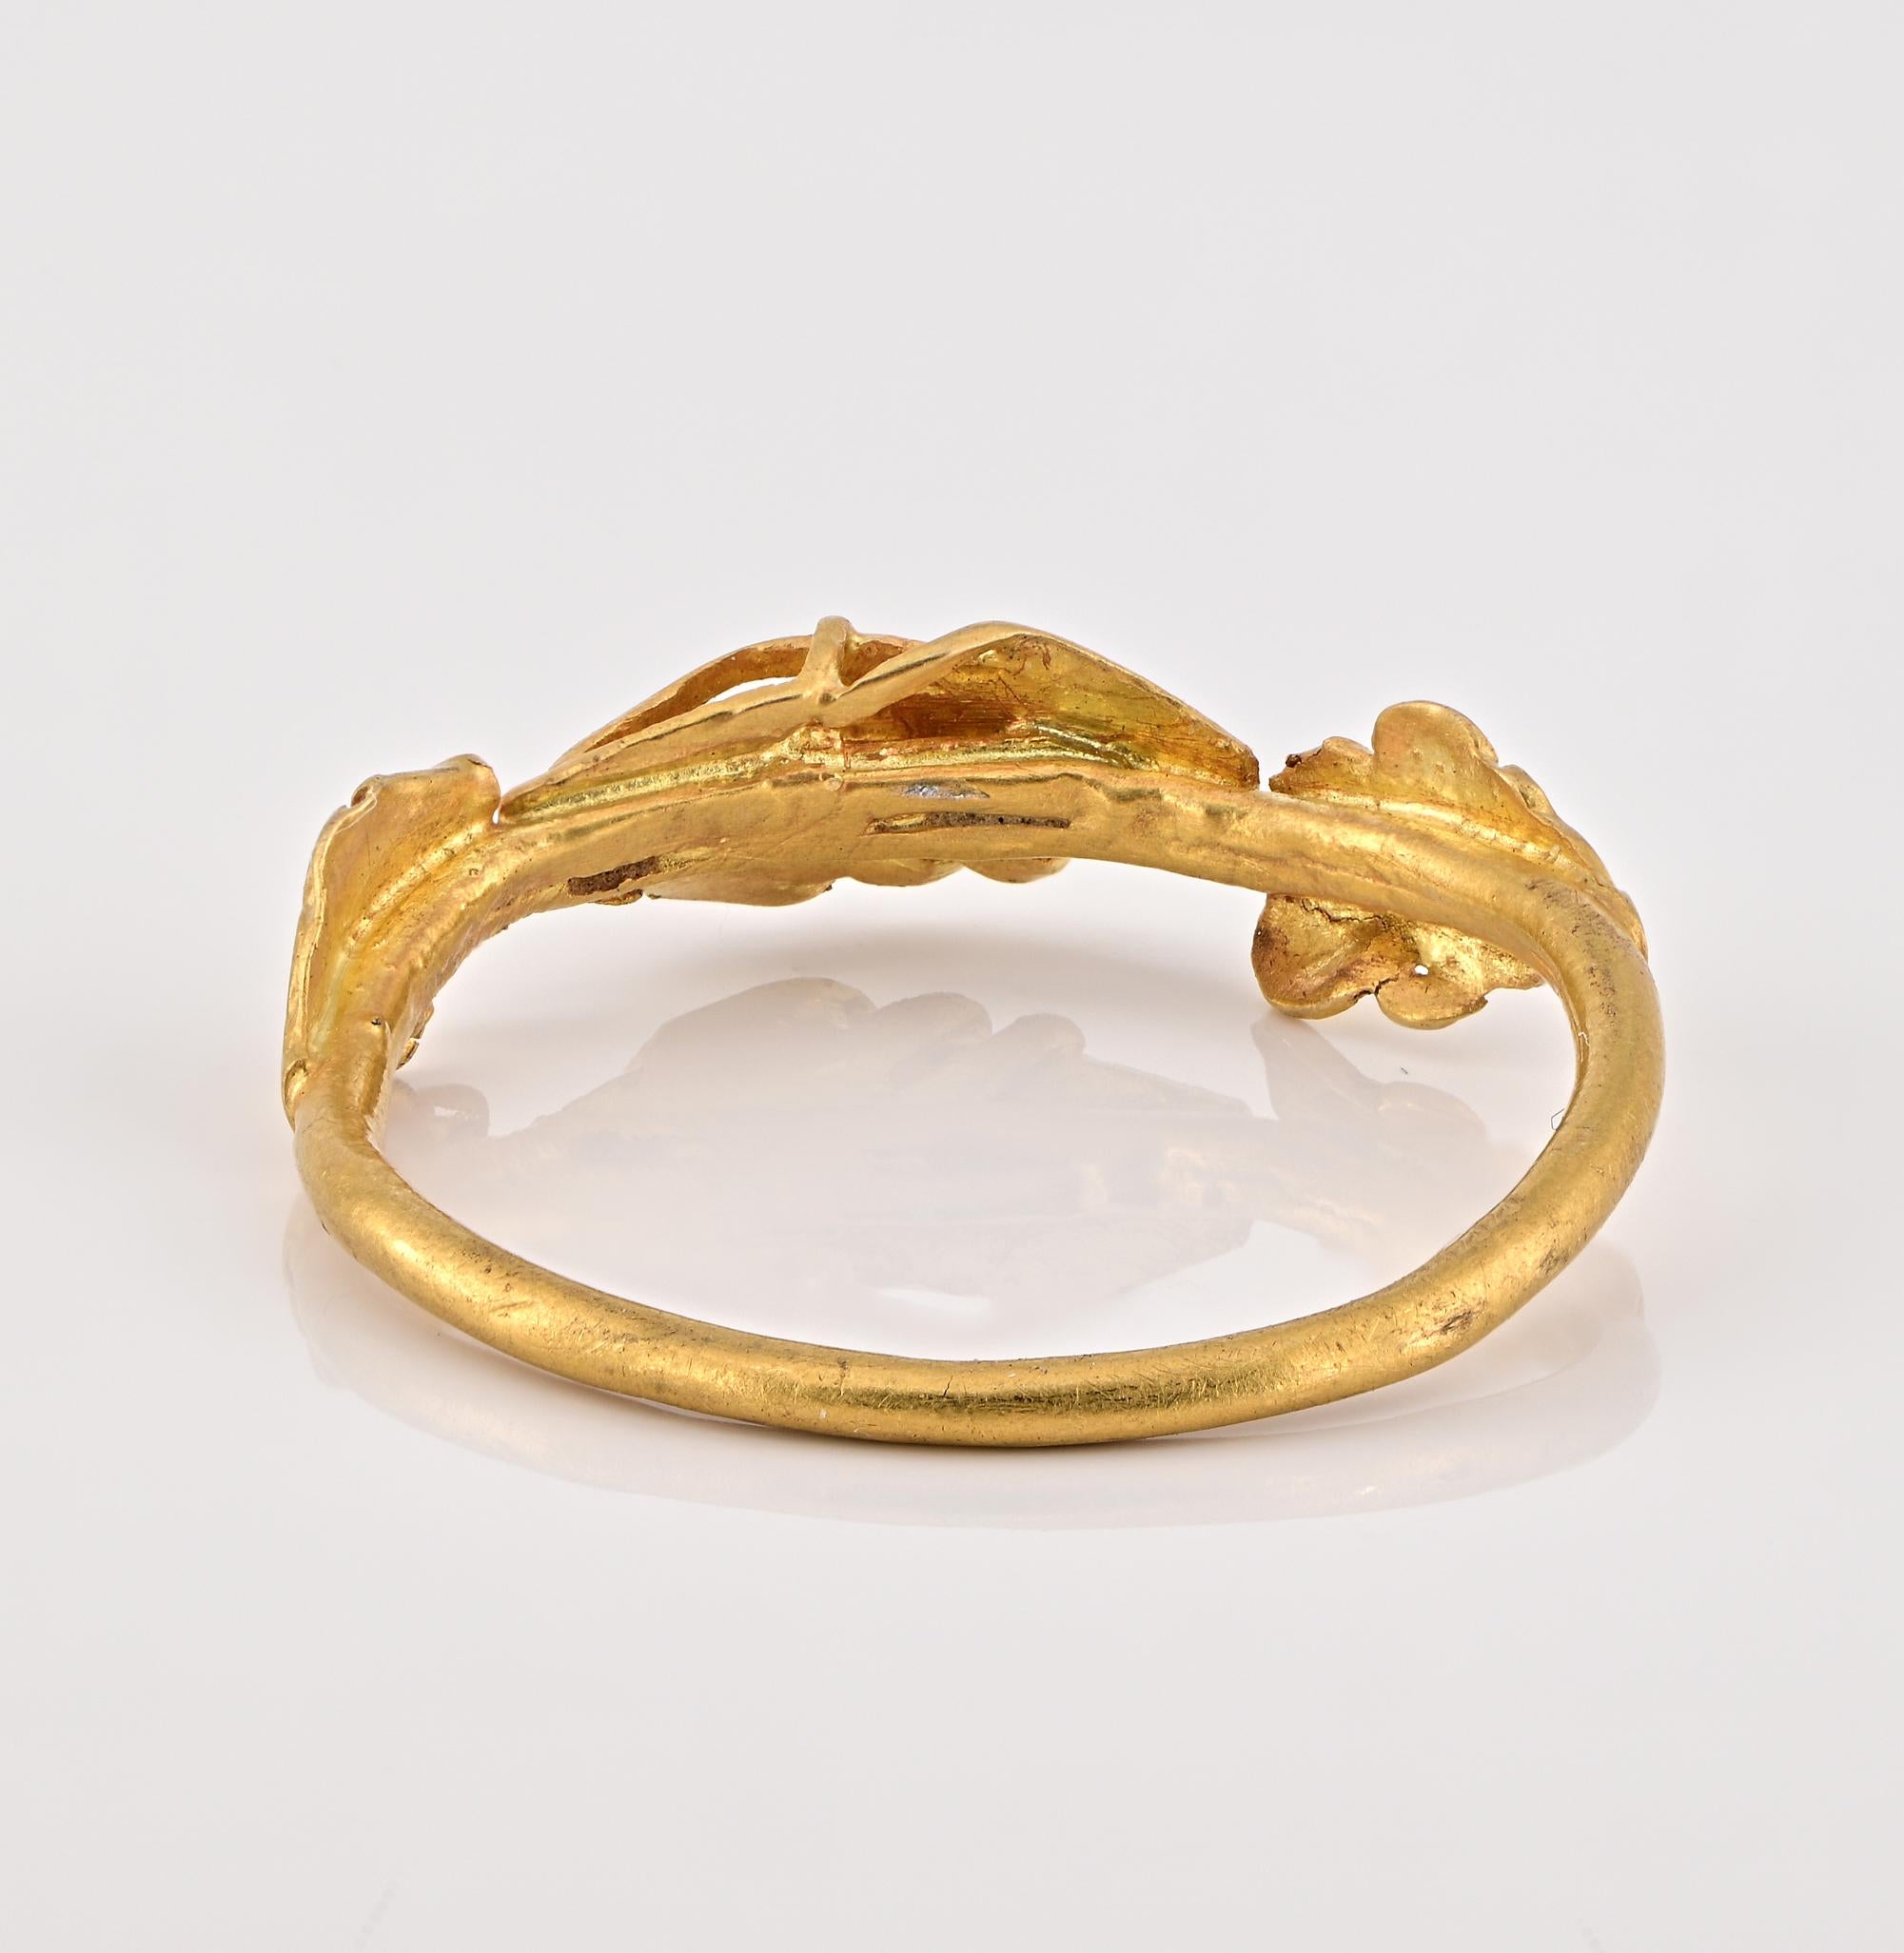 Rare European 14th/15th Century 22/24 Kt Fede Ring For Sale 5